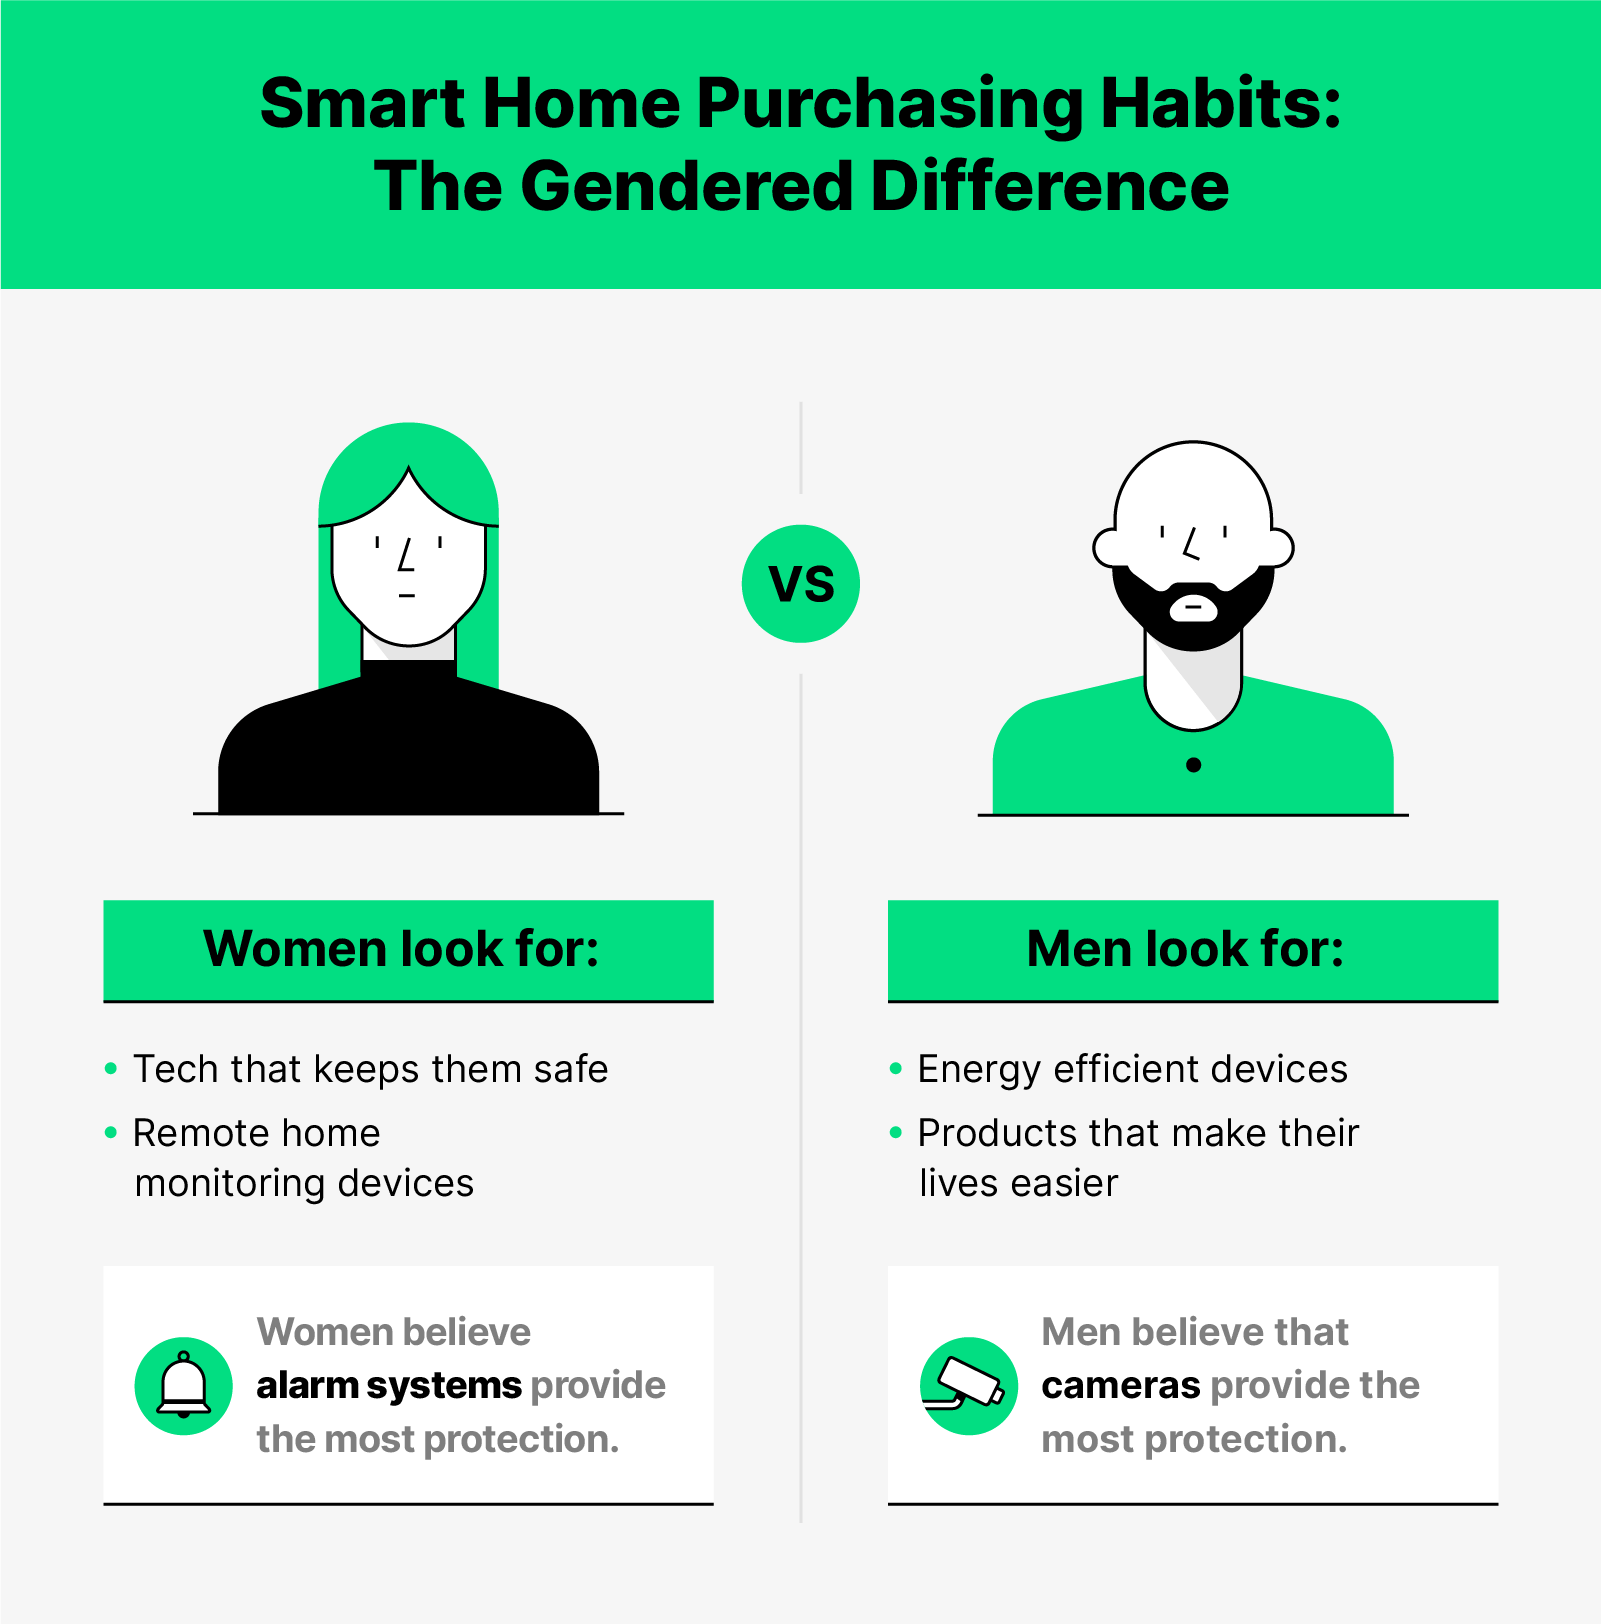 Illustration of a woman on the left and a man on the right with explanations underneath on their smart home preferences